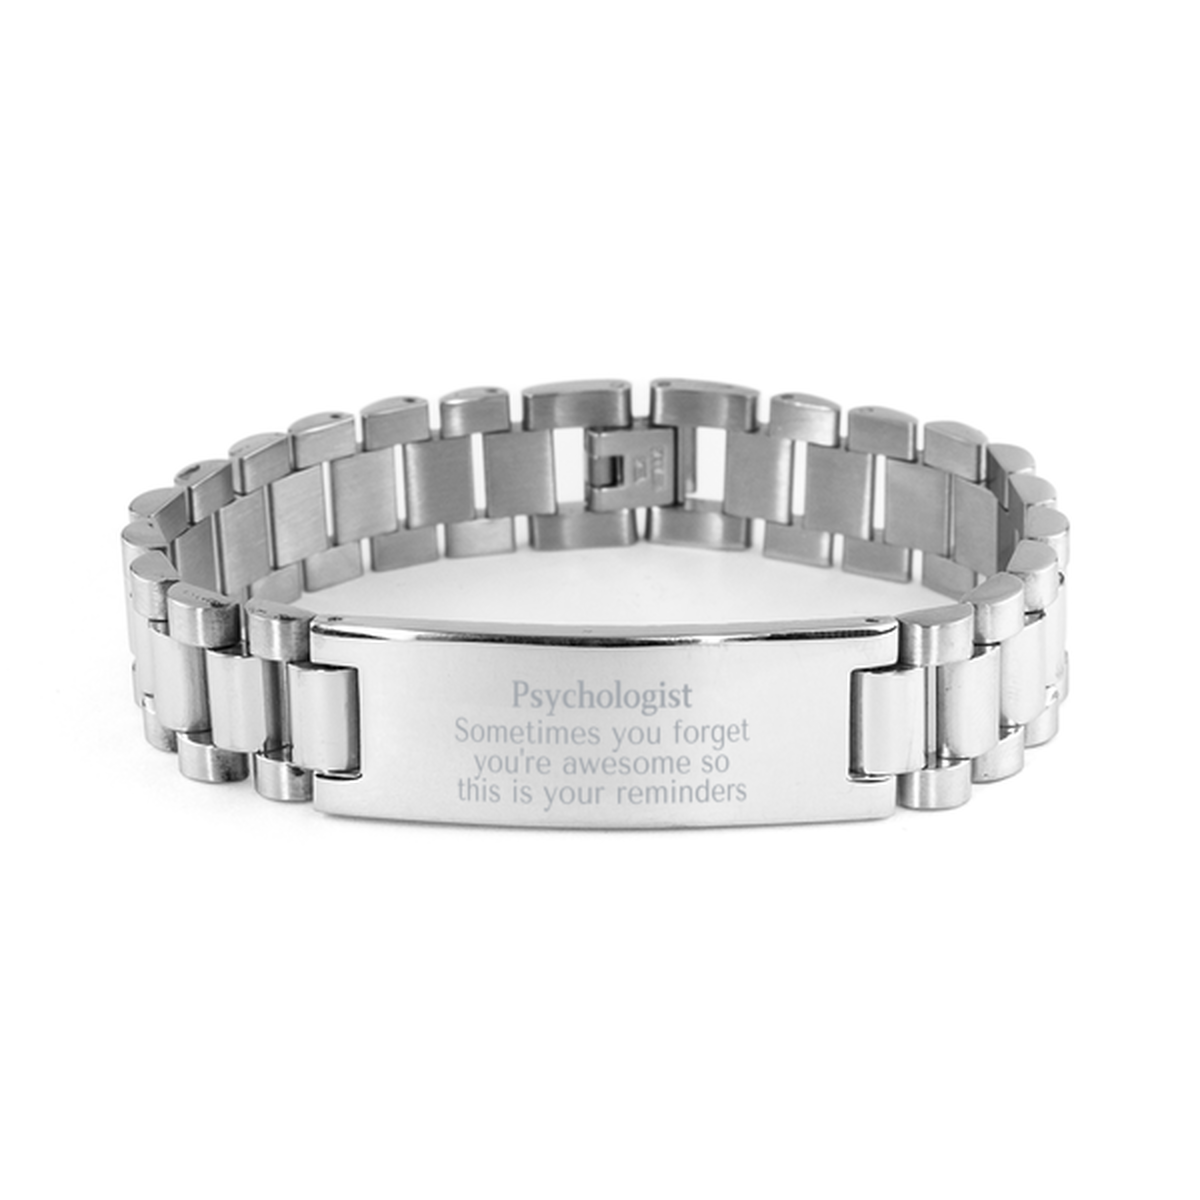 Sentimental Psychologist Ladder Stainless Steel Bracelet, Psychologist Sometimes you forget you're awesome so this is your reminders, Graduation Christmas Birthday Gifts for Psychologist, Men, Women, Coworkers